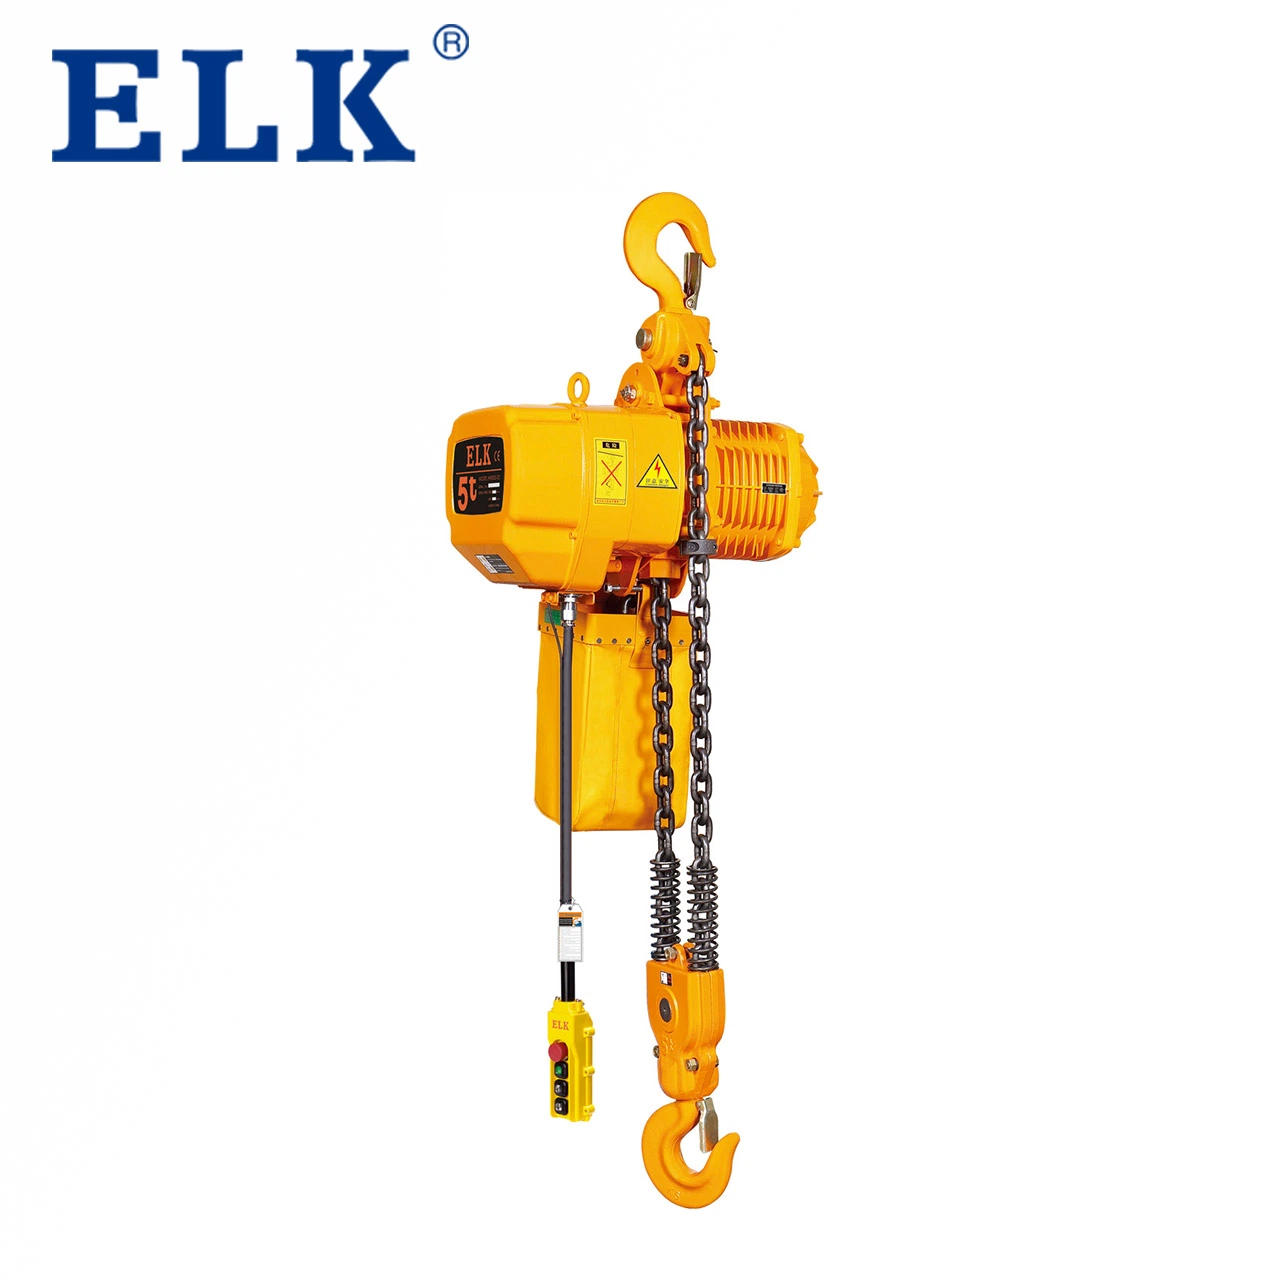 Elk 5 Ton Electric Hoist Ce Approval, Fec G80 Chain, Wireless Remote Control, Overload Protector, Factory Price